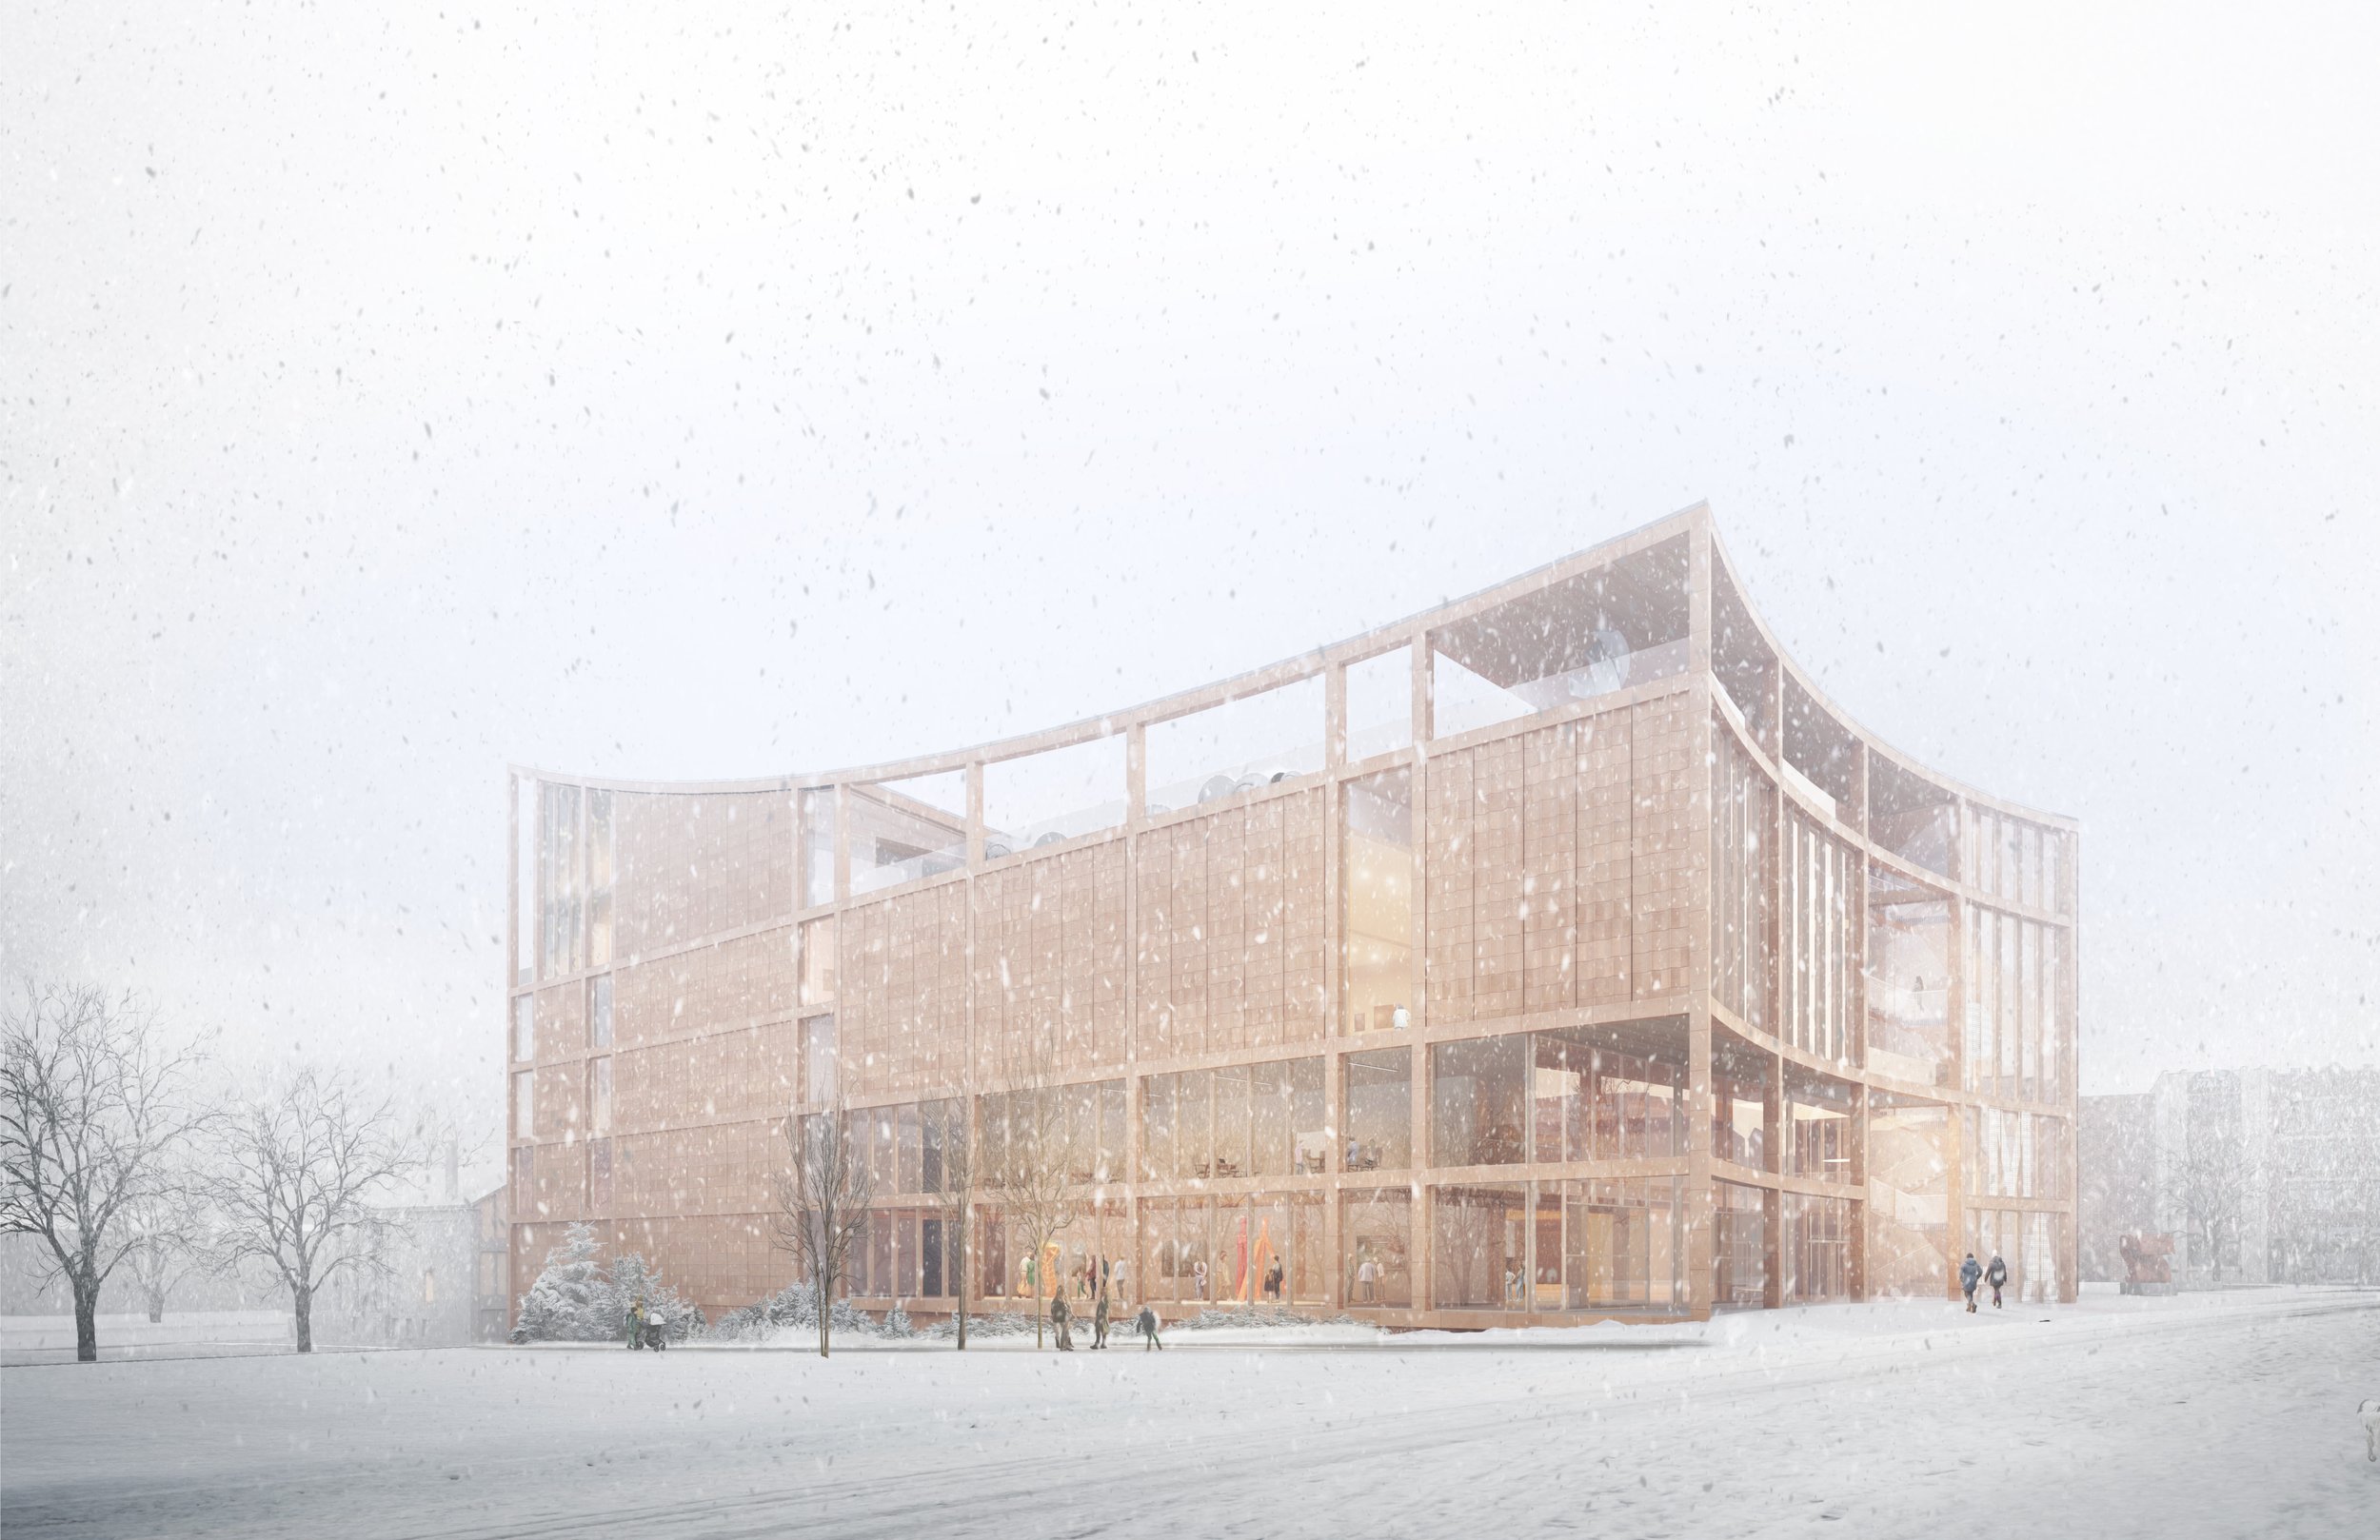  The New Wing seen from Free St., in the Winter. Image courtesy of Portland Museum of Art, Maine / LEVER Architecture / Dovetail Design Strategists 